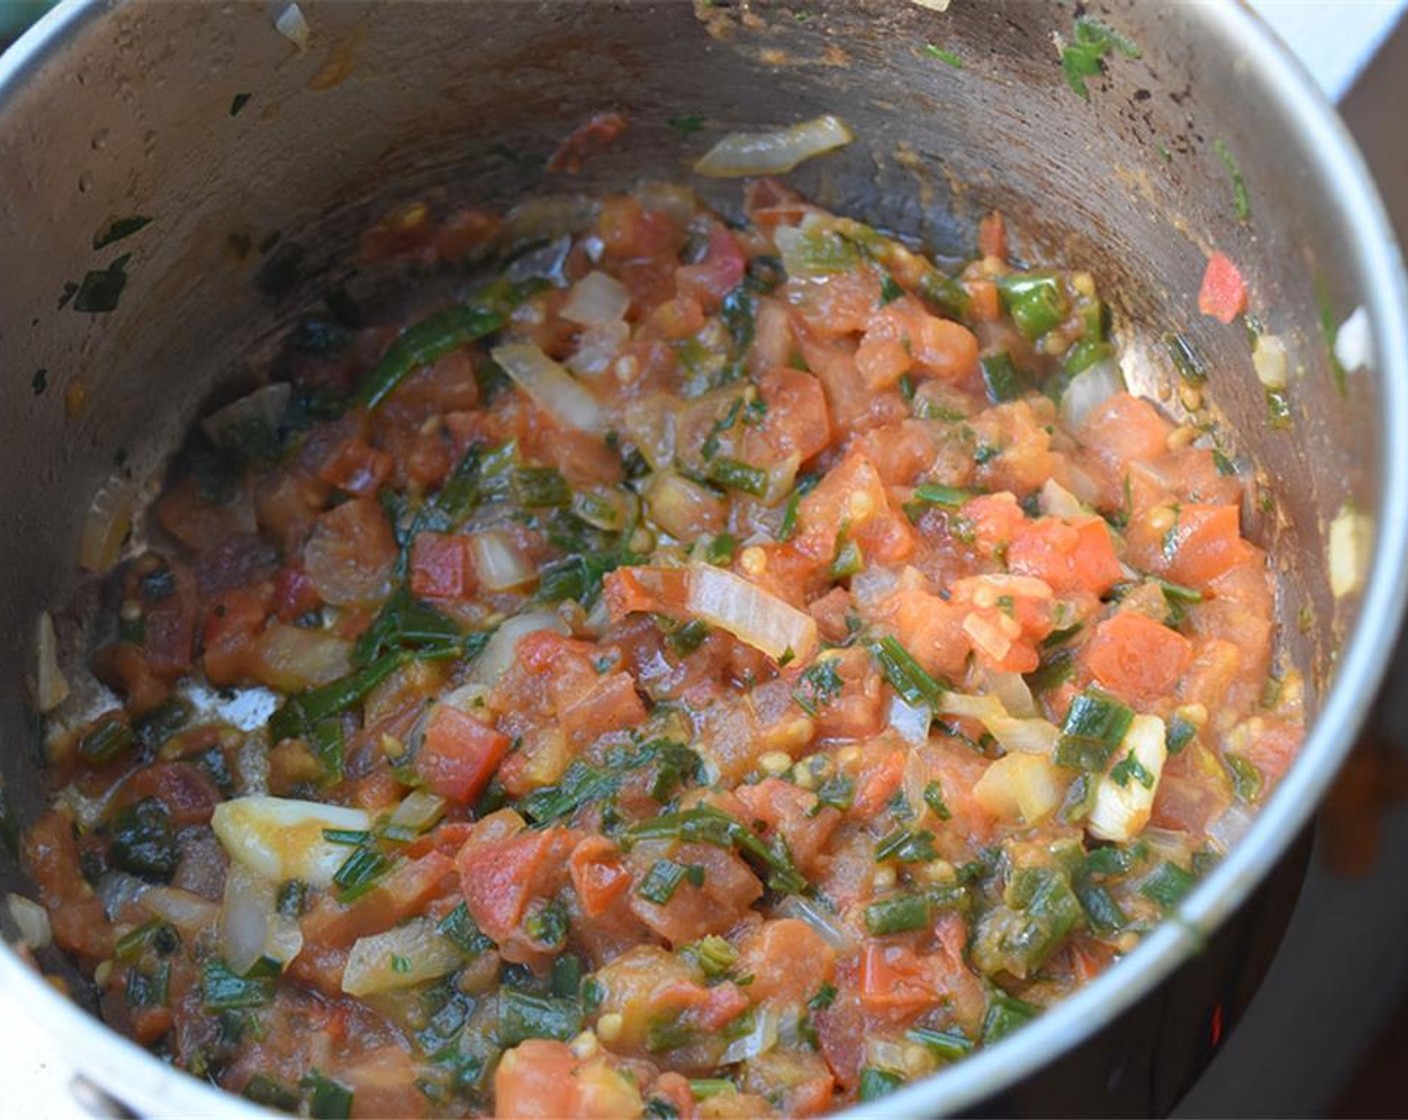 step 9 Combine Scallion (1), Tomatoes (2 cups), Garlic (2 cloves), Ground Cumin (1 tsp) with Salt (to taste), and Ground Black Pepper (to taste). Heat Vegetable Oil (3 Tbsp) in a skillet. Add mixture and cook for 10 minutes stirring occasionally. This is Hogao.